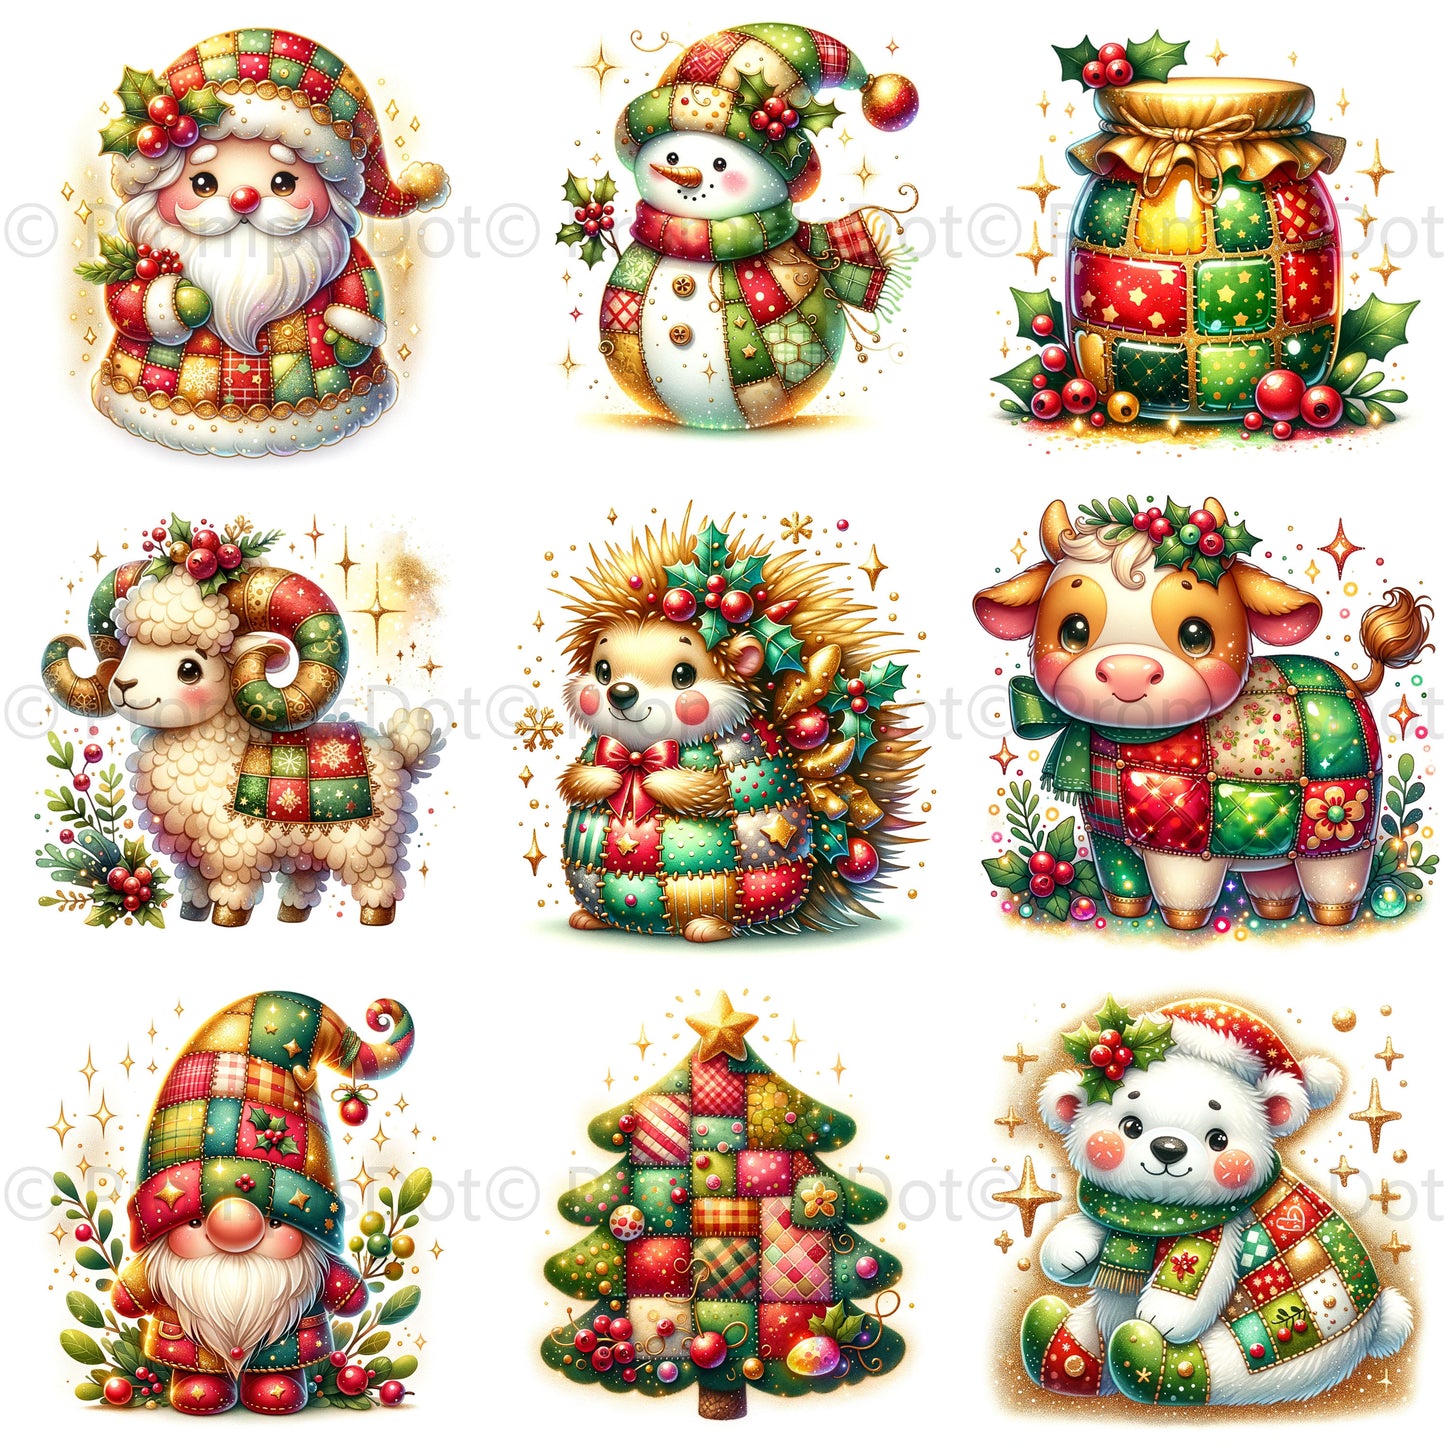 Super Cute Christmas Illustrations DALLE 3 Prompt